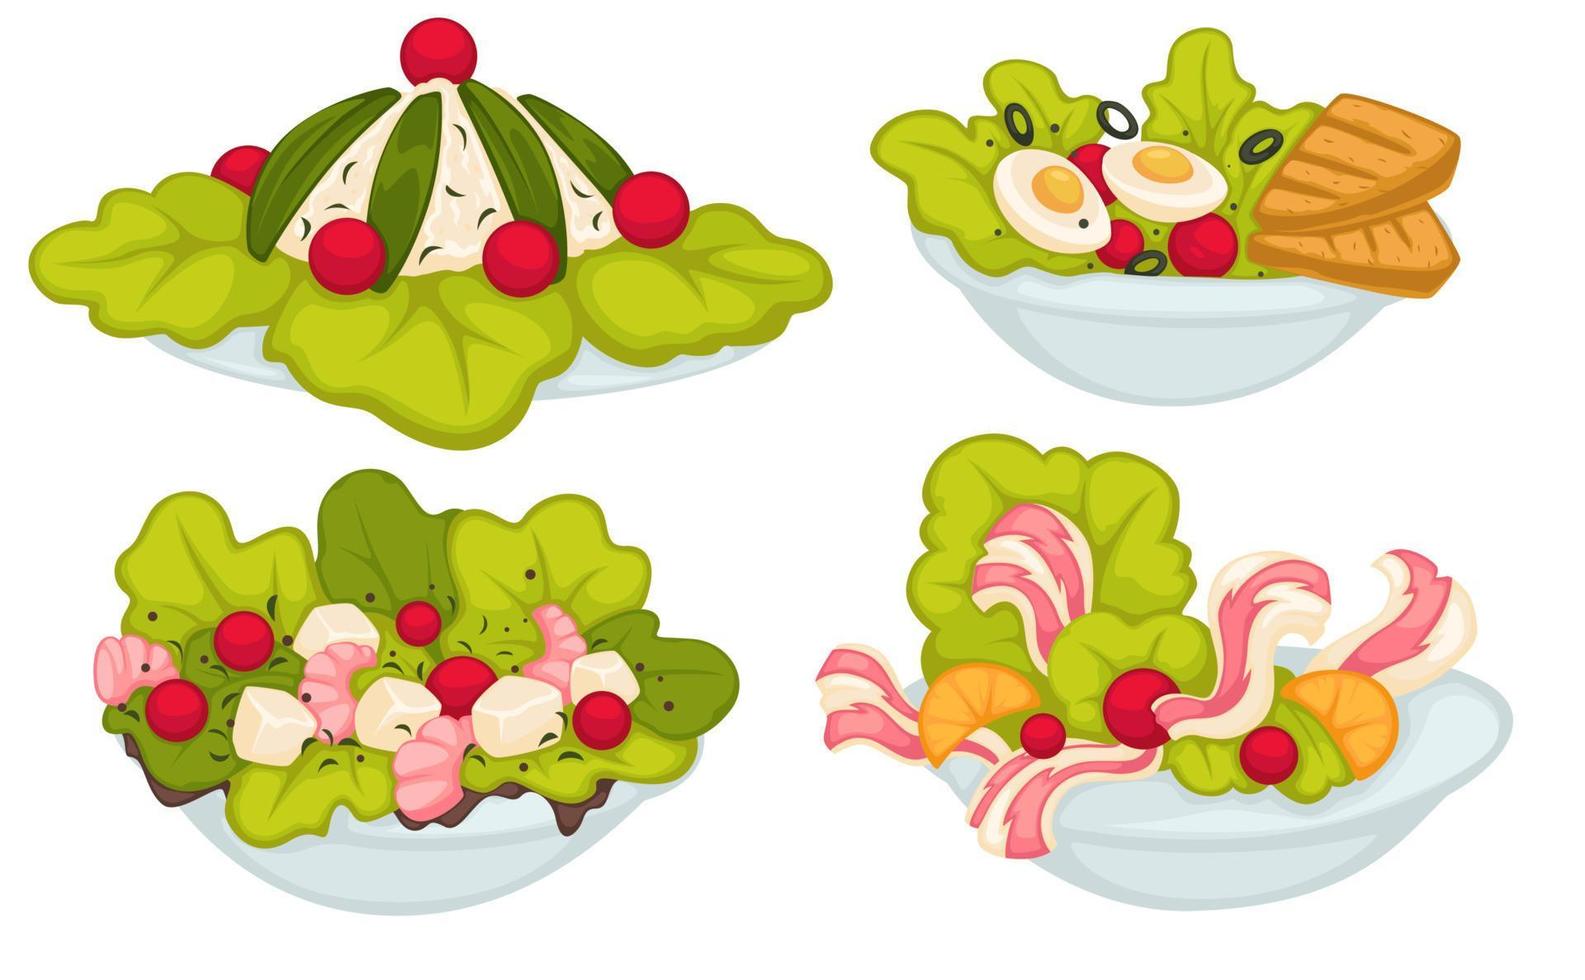 Salads variety, seafood and vegetarian dishes vector